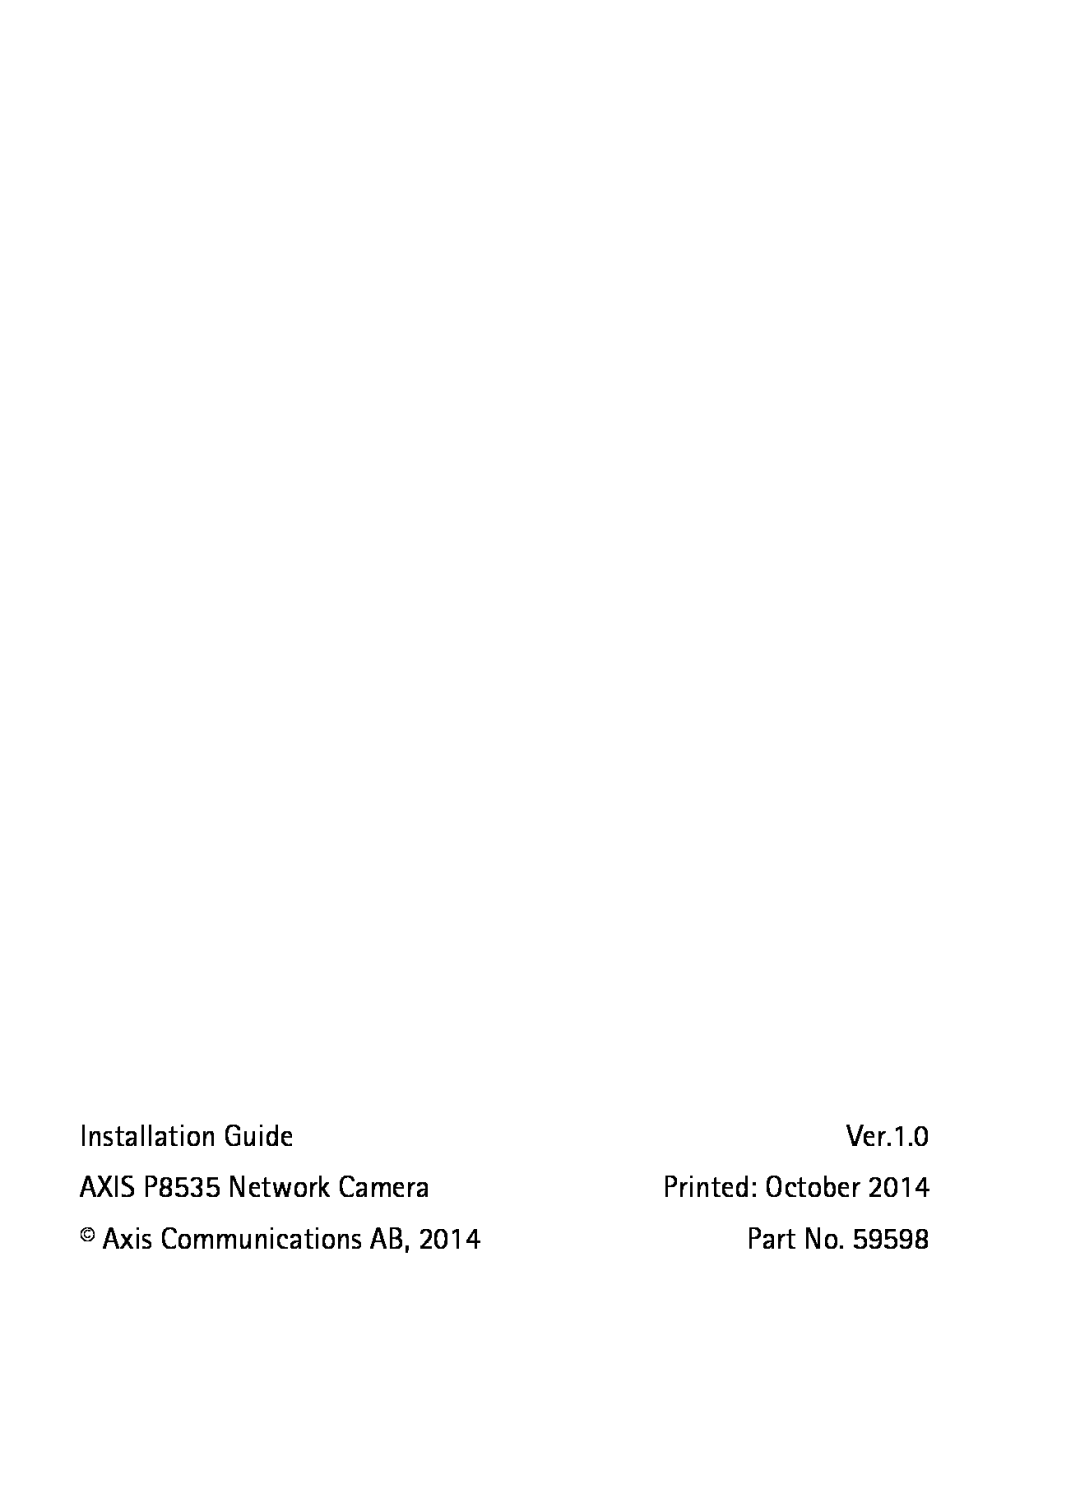 Axis Communications Printed October, Installation Guide, Ver.1.0, AXIS P8535 Network Camera, Axis Communications AB 